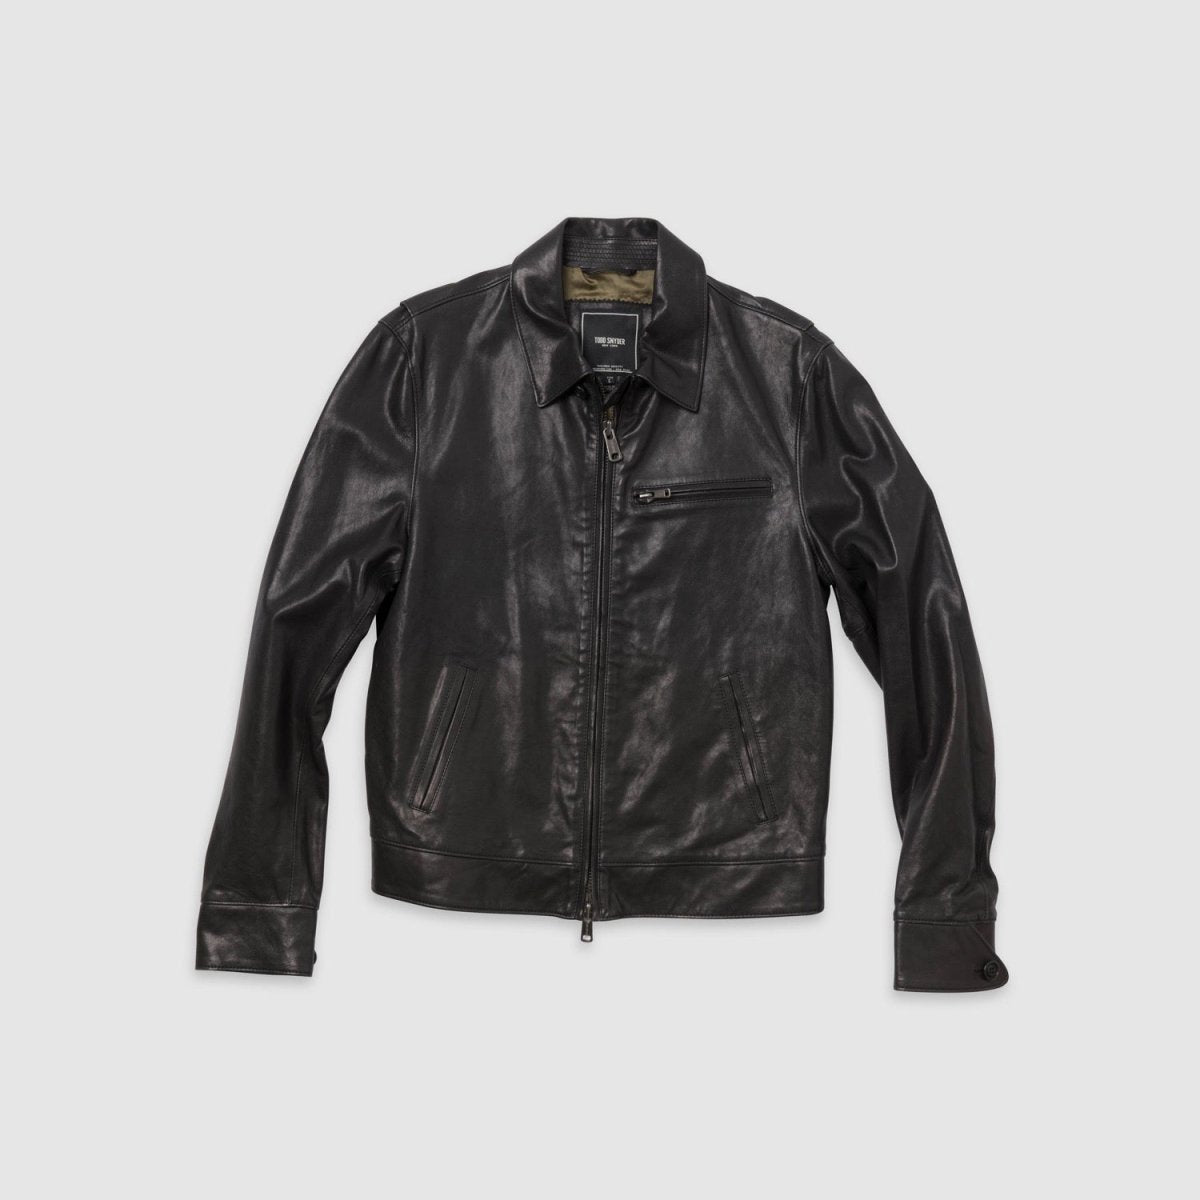 Todd Snyder - Washed & Burnished Italian Lambskin Leather "Dean" Jacket